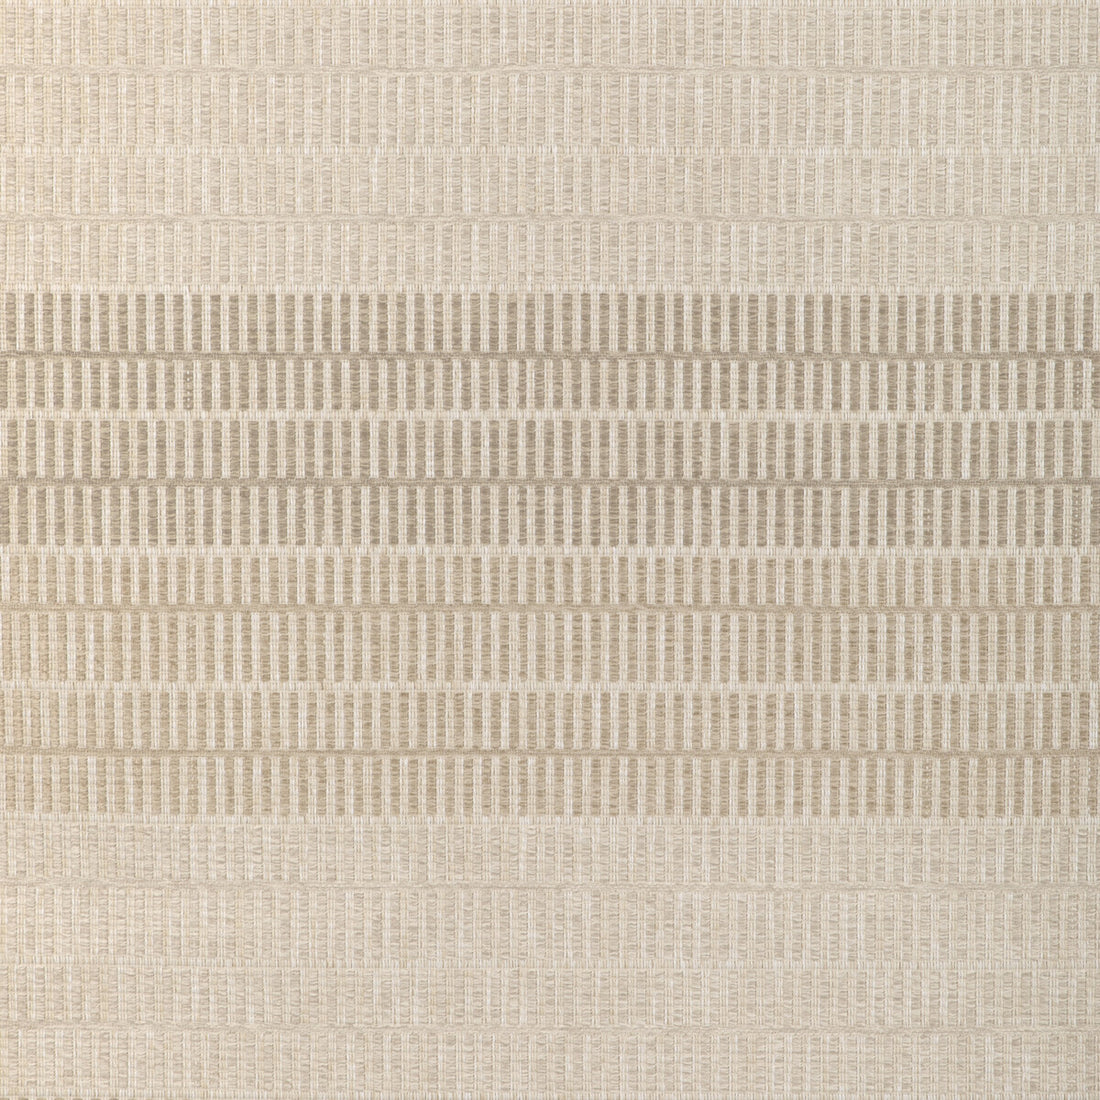 Les Oliviers Weave fabric in linen color - pattern 8024117.1611.0 - by Brunschwig &amp; Fils in the Les Ensembliers L&